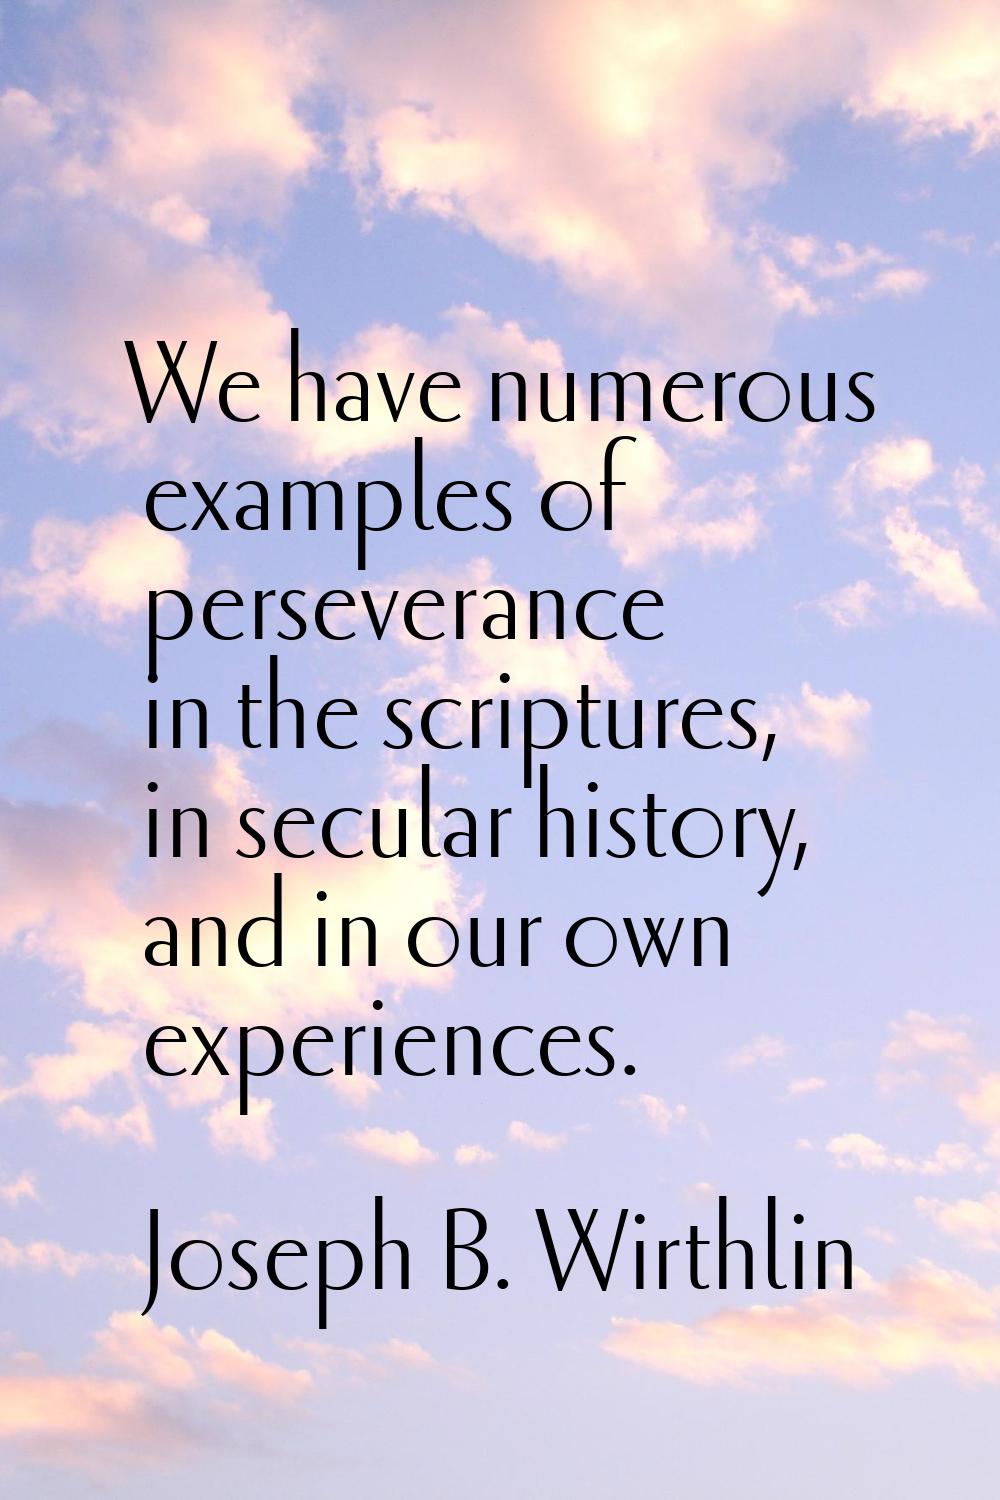 We have numerous examples of perseverance in the scriptures, in secular history, and in our own exp